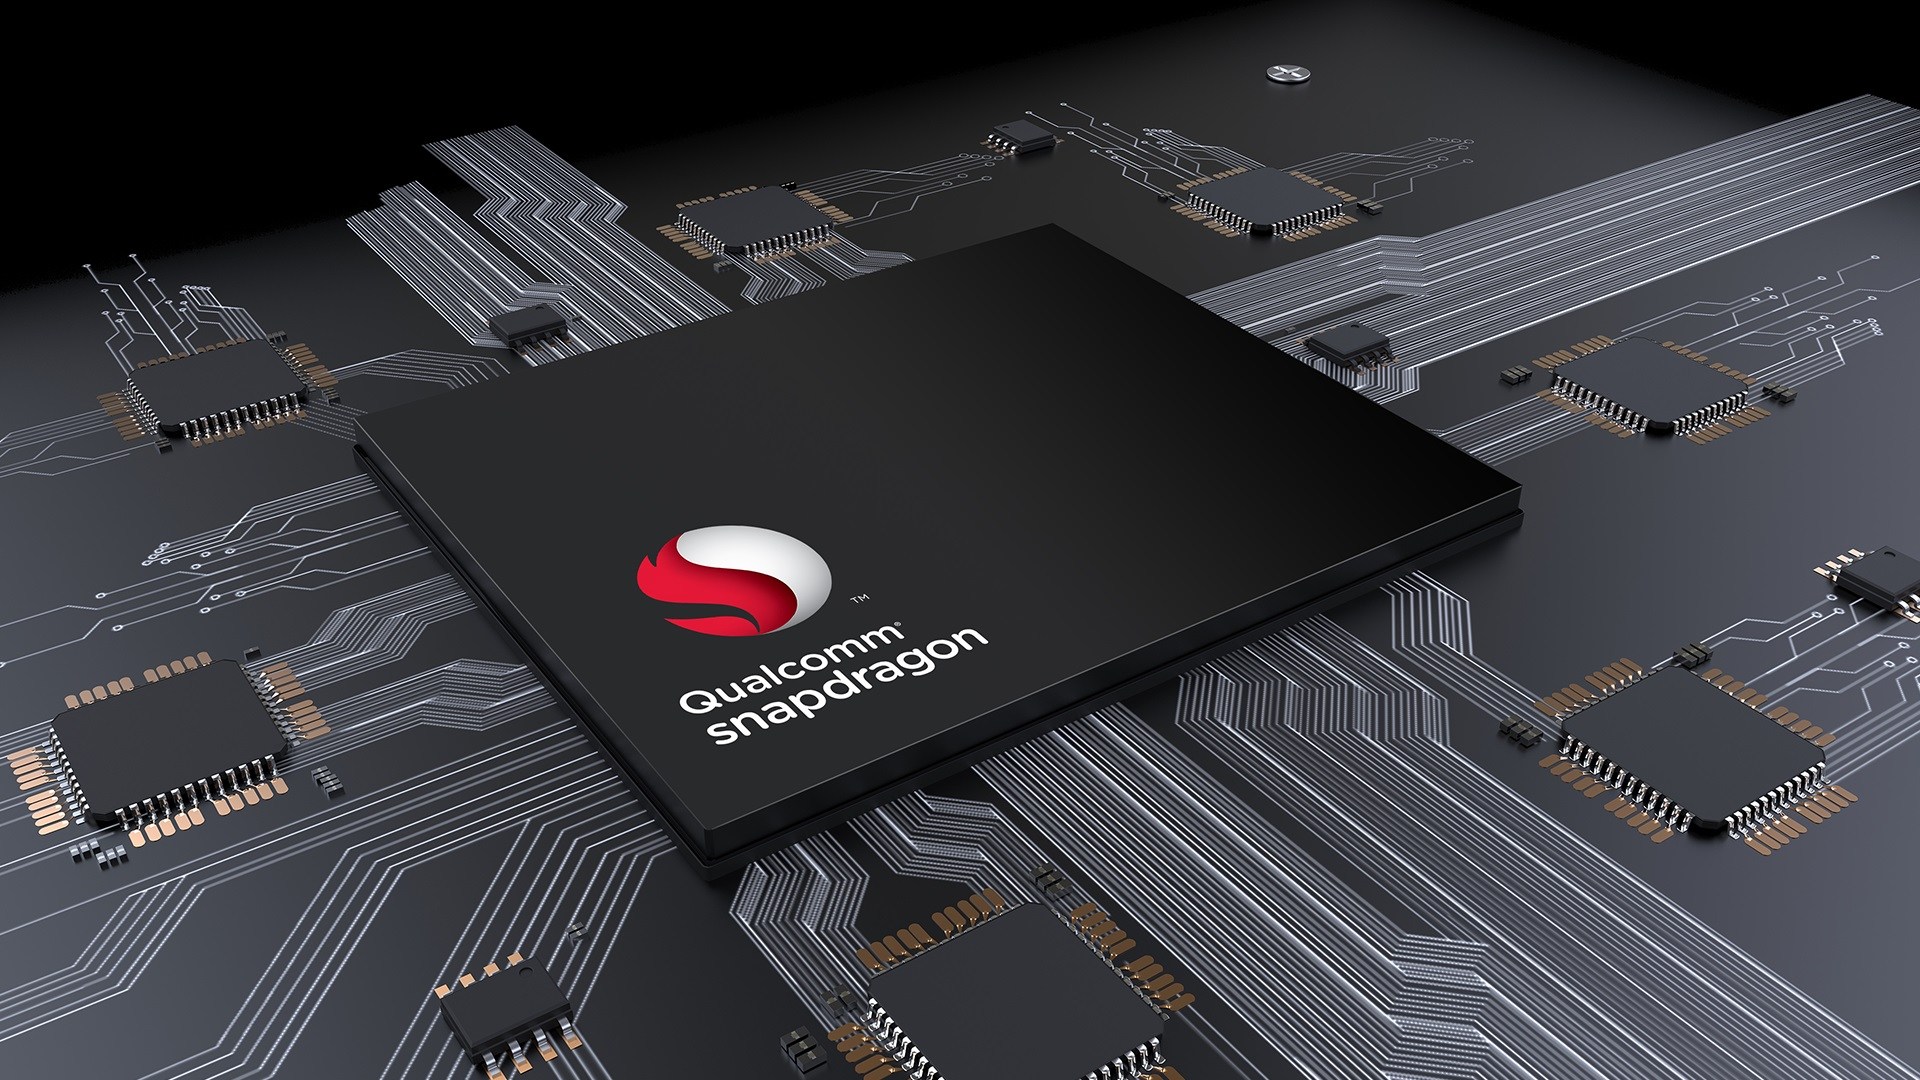 Despite rumors, 7nm is Not Slowing Down for Qualcomm